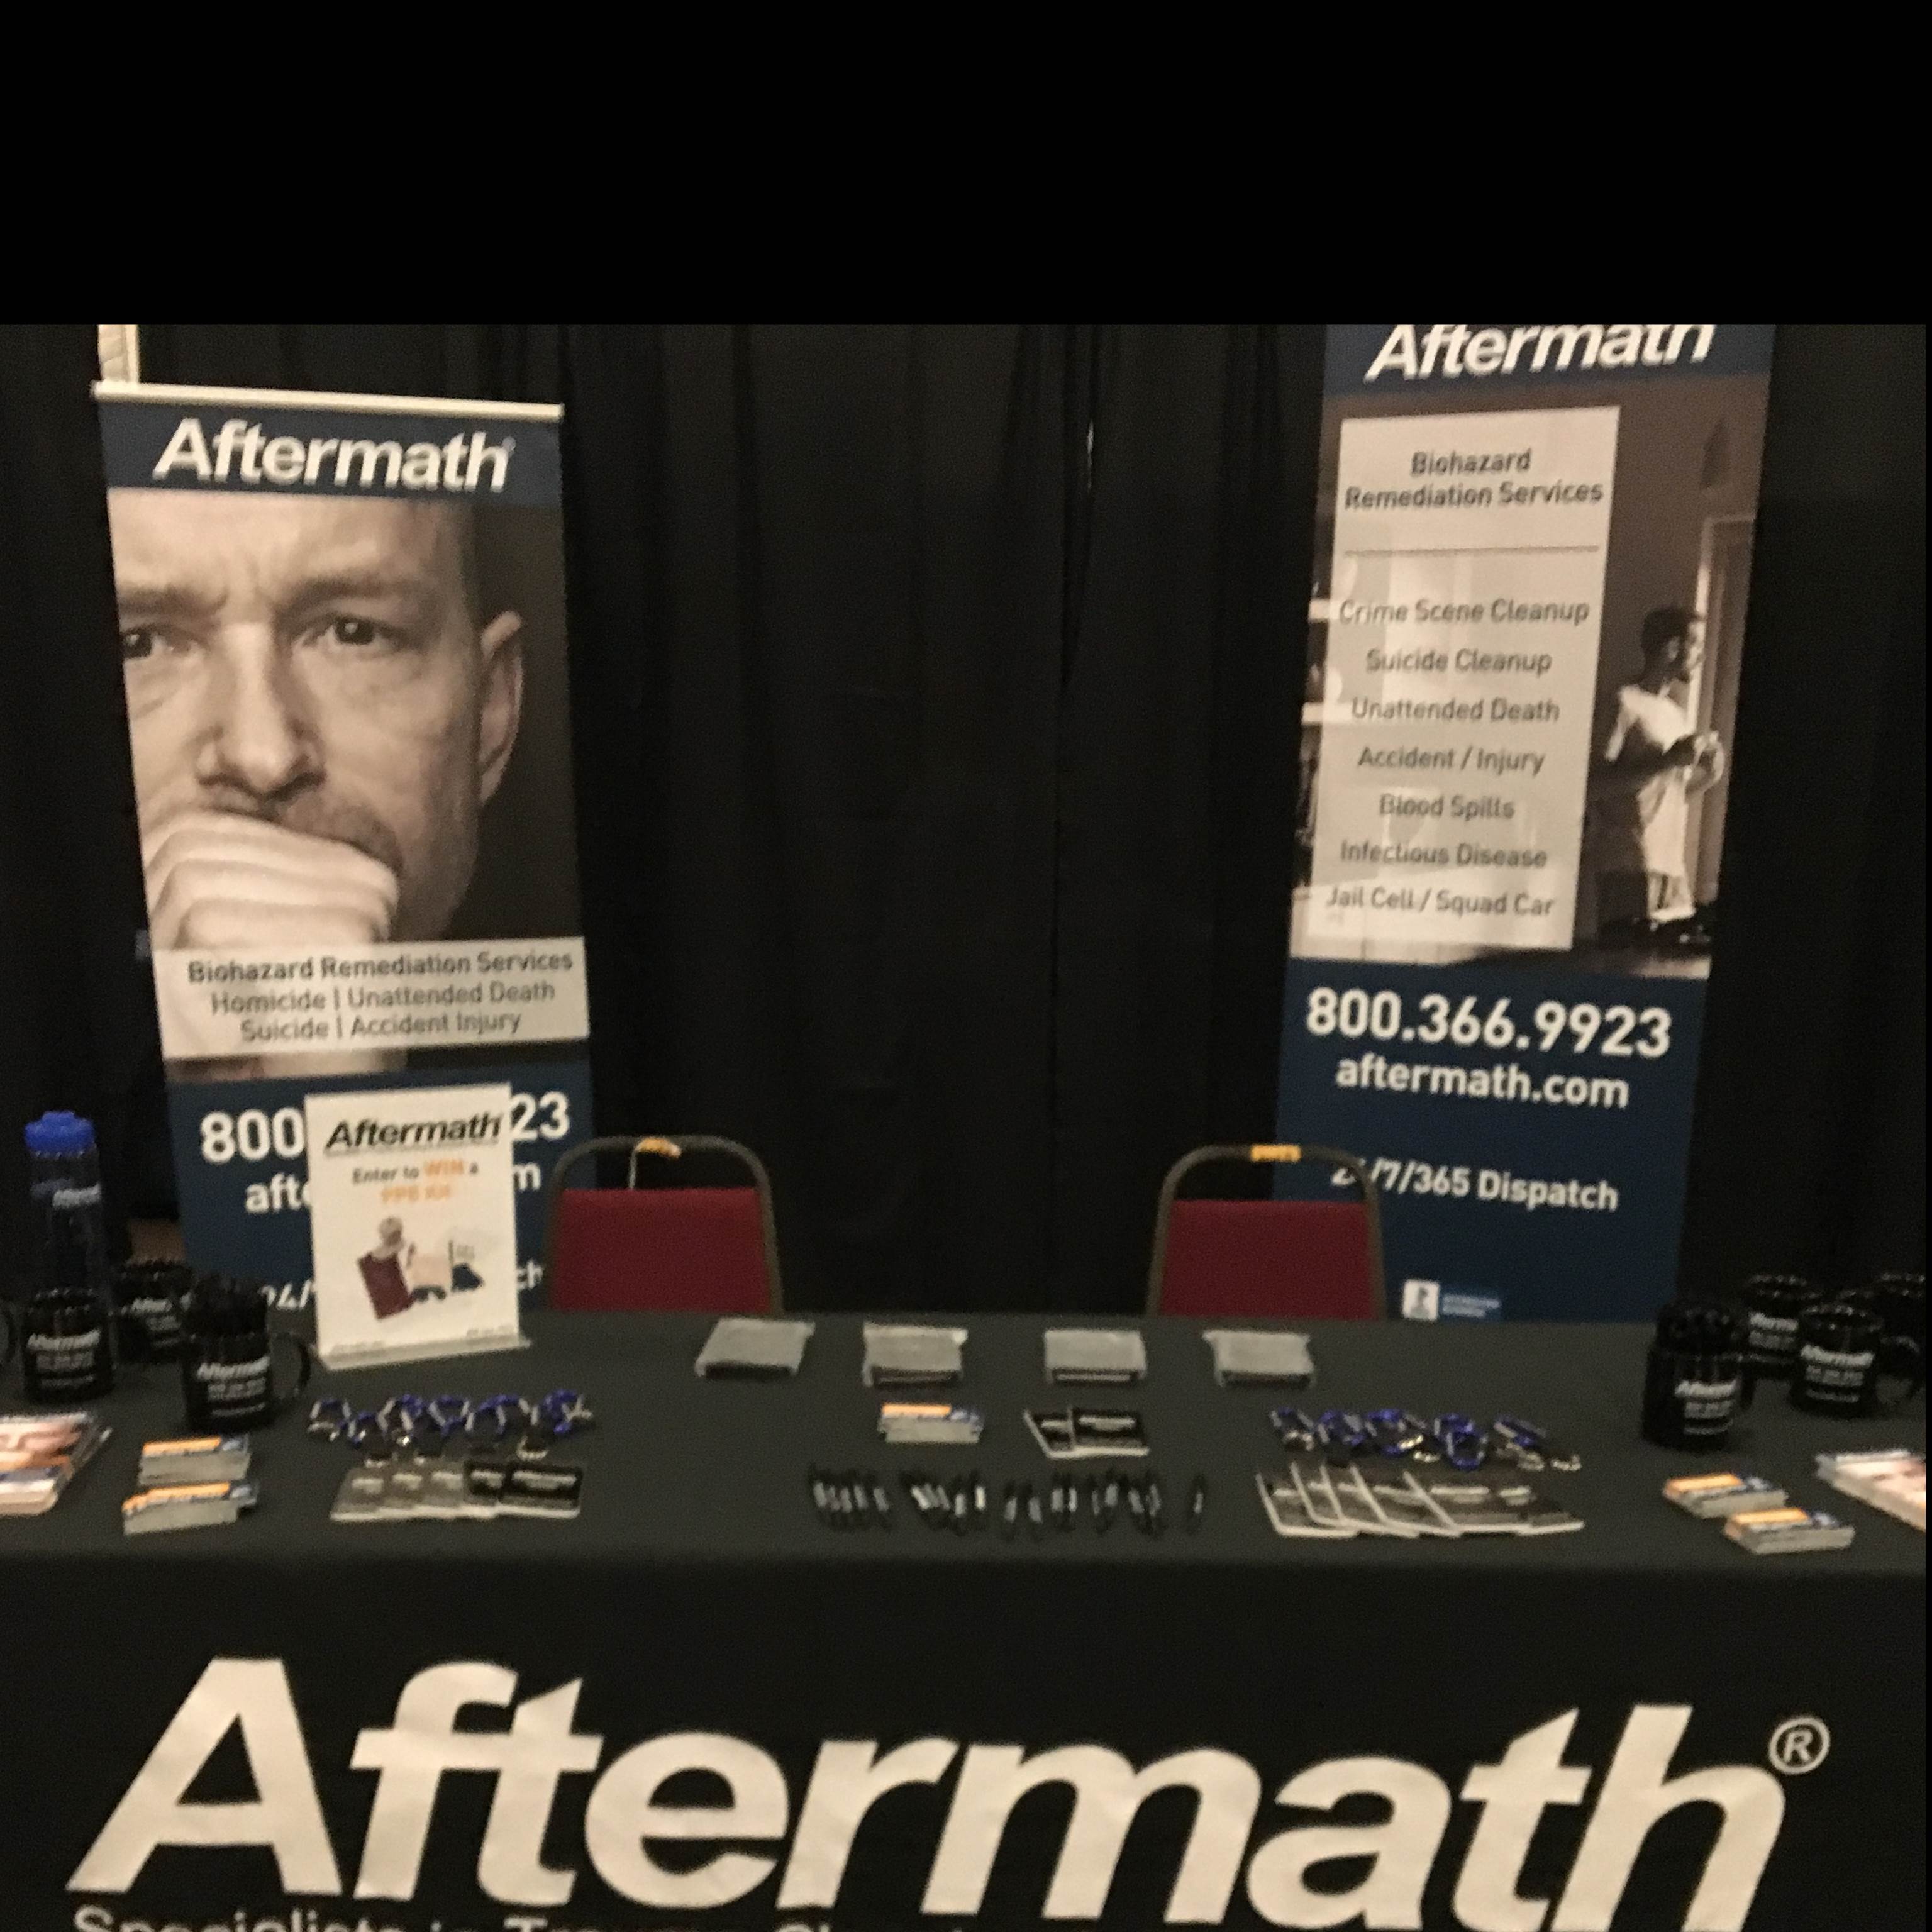 Our Aftermath Arizona team attends the AACOP Conference.